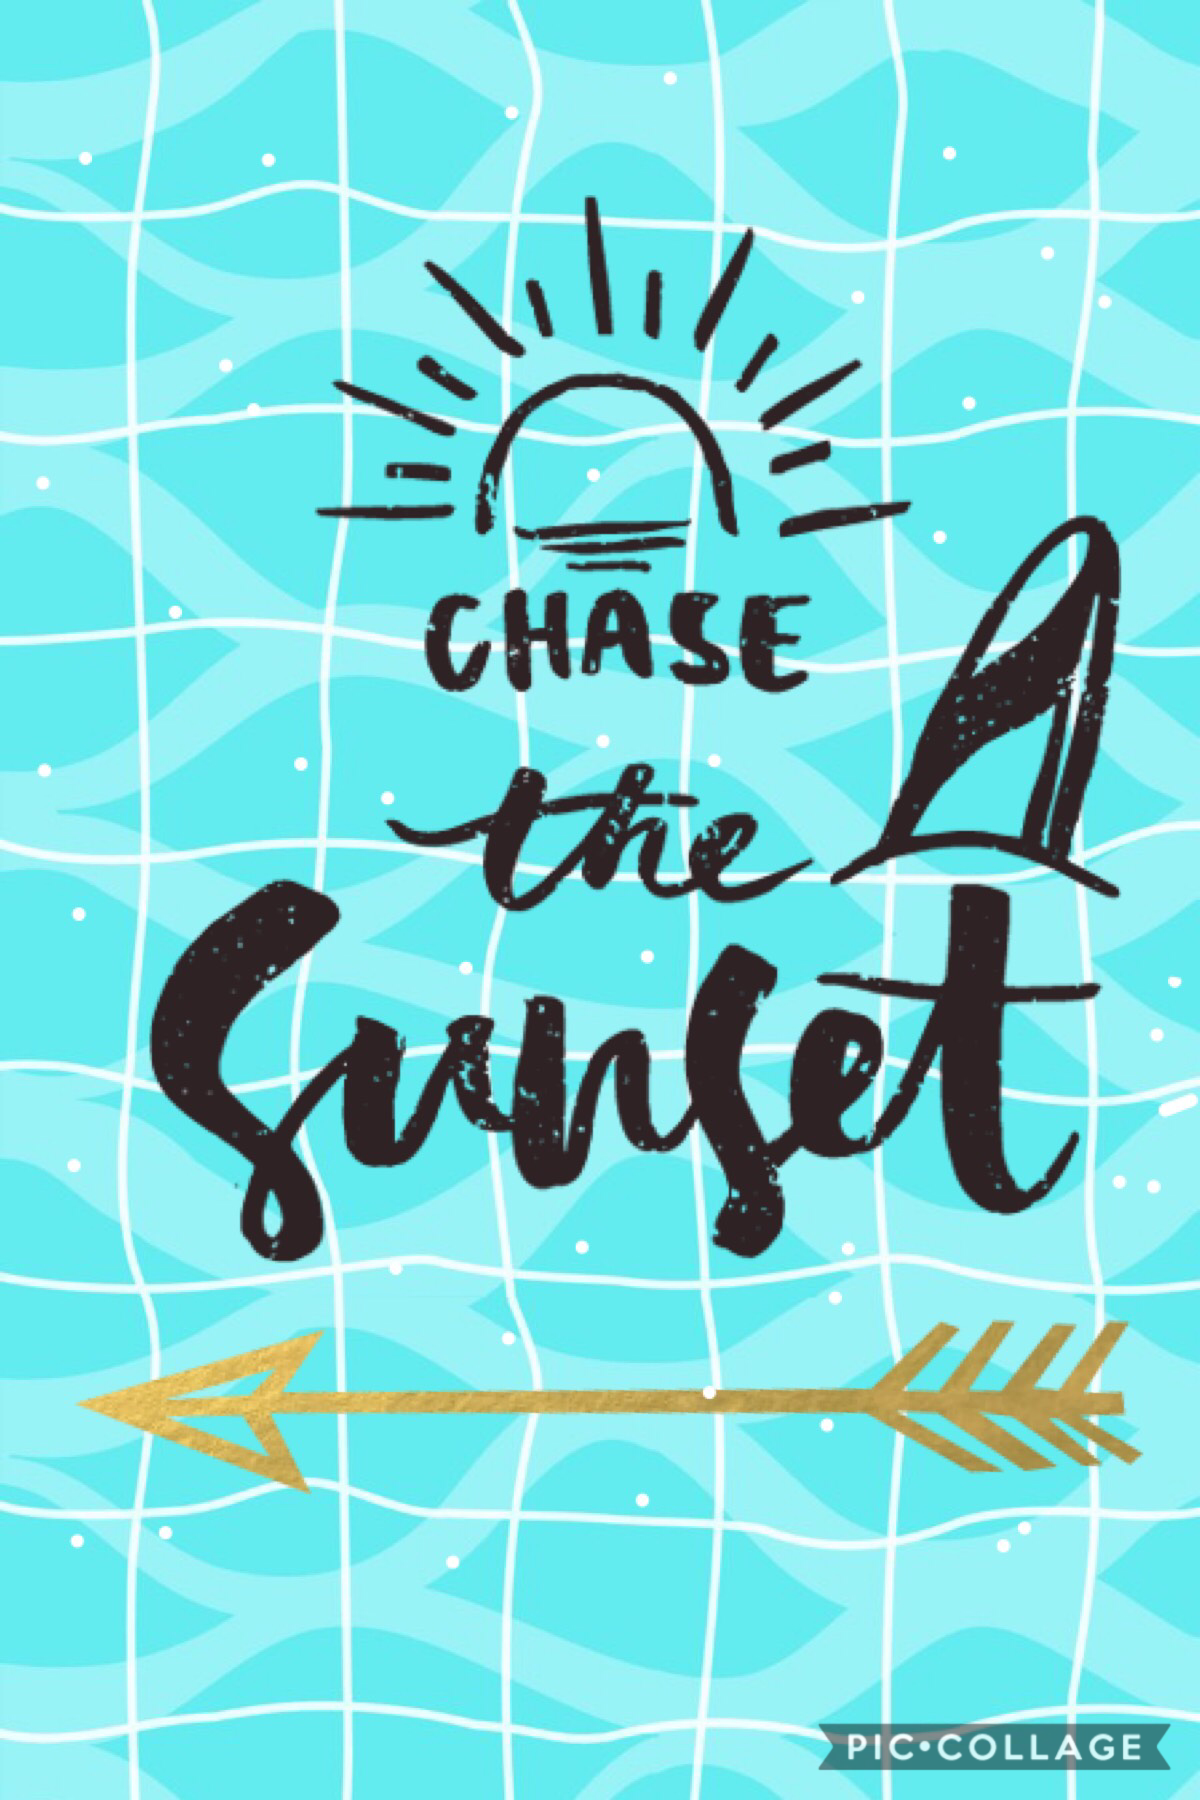 🔆Chase the sunset!!! 🔆